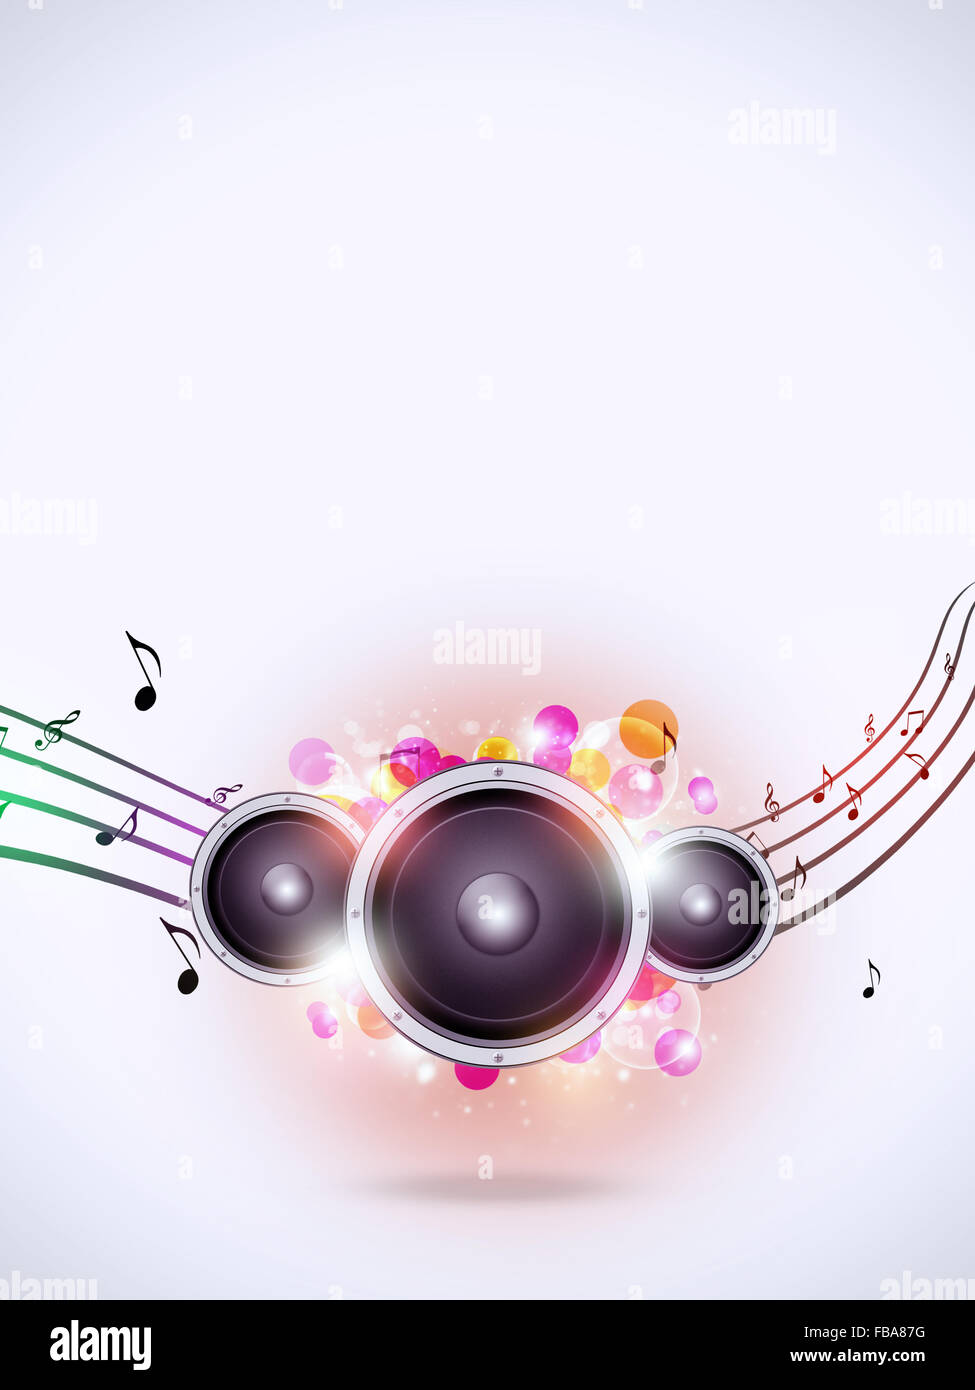 abstract music background with sound speaker and music notes Stock Photo